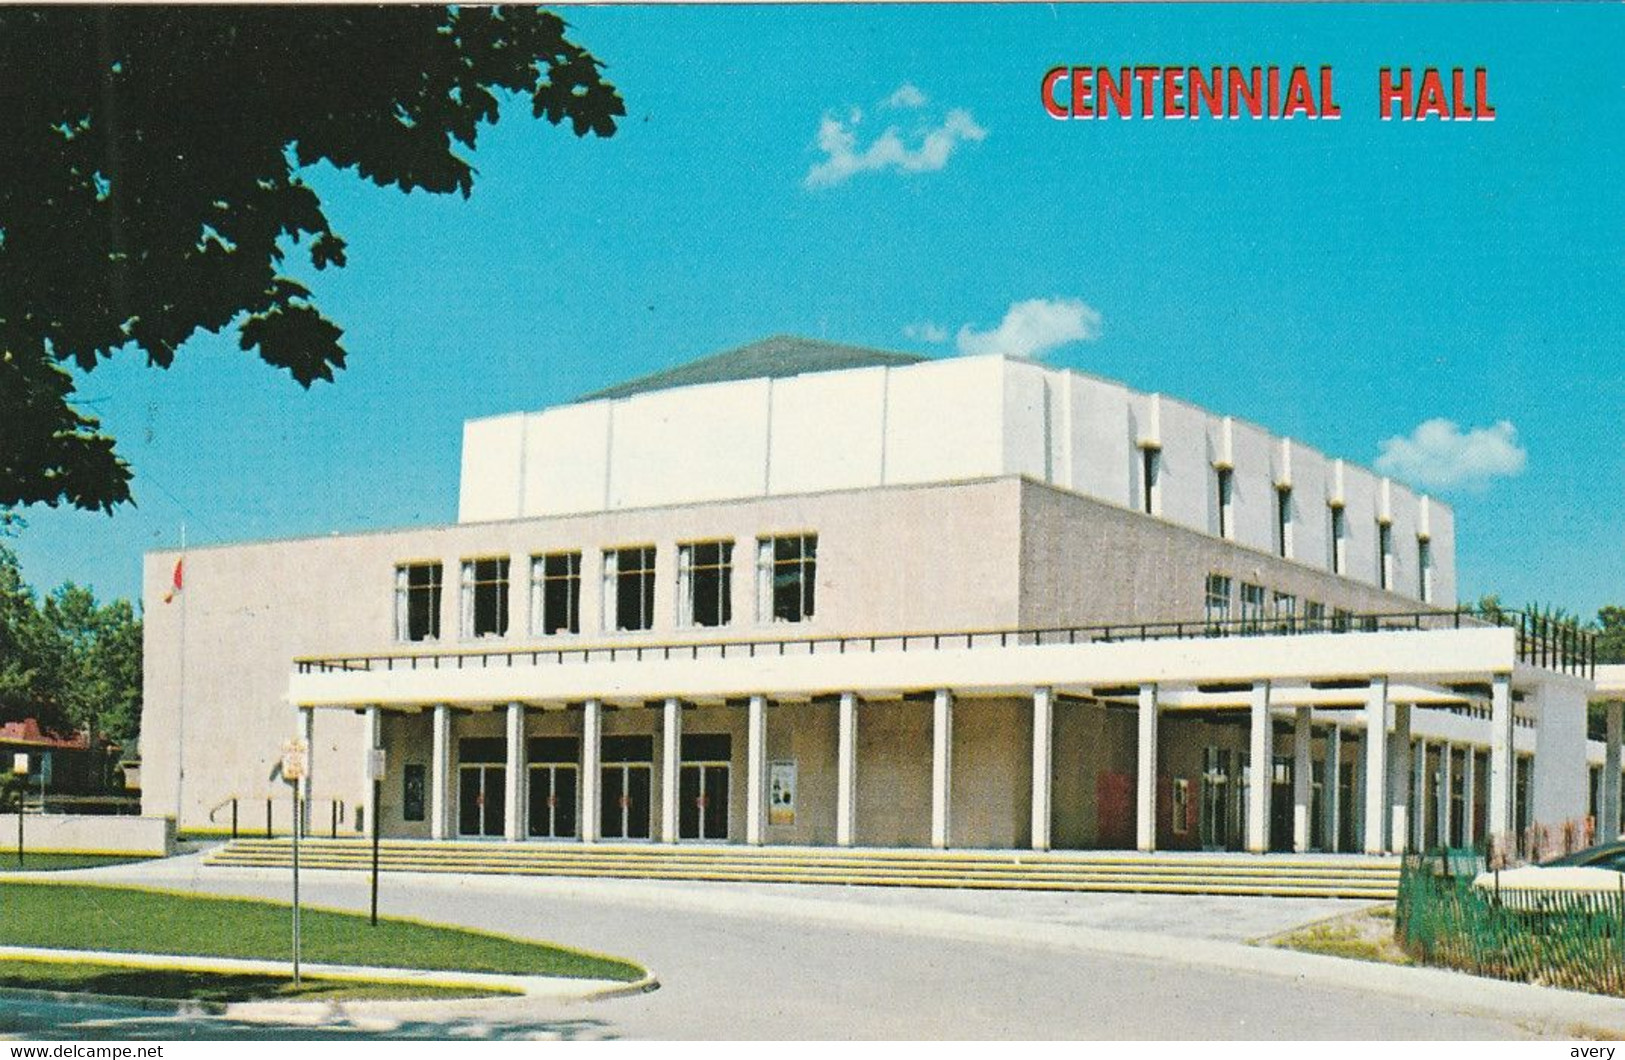 Centennial Hall And Convention Centre, London, Ontario  Built In 1967 - London